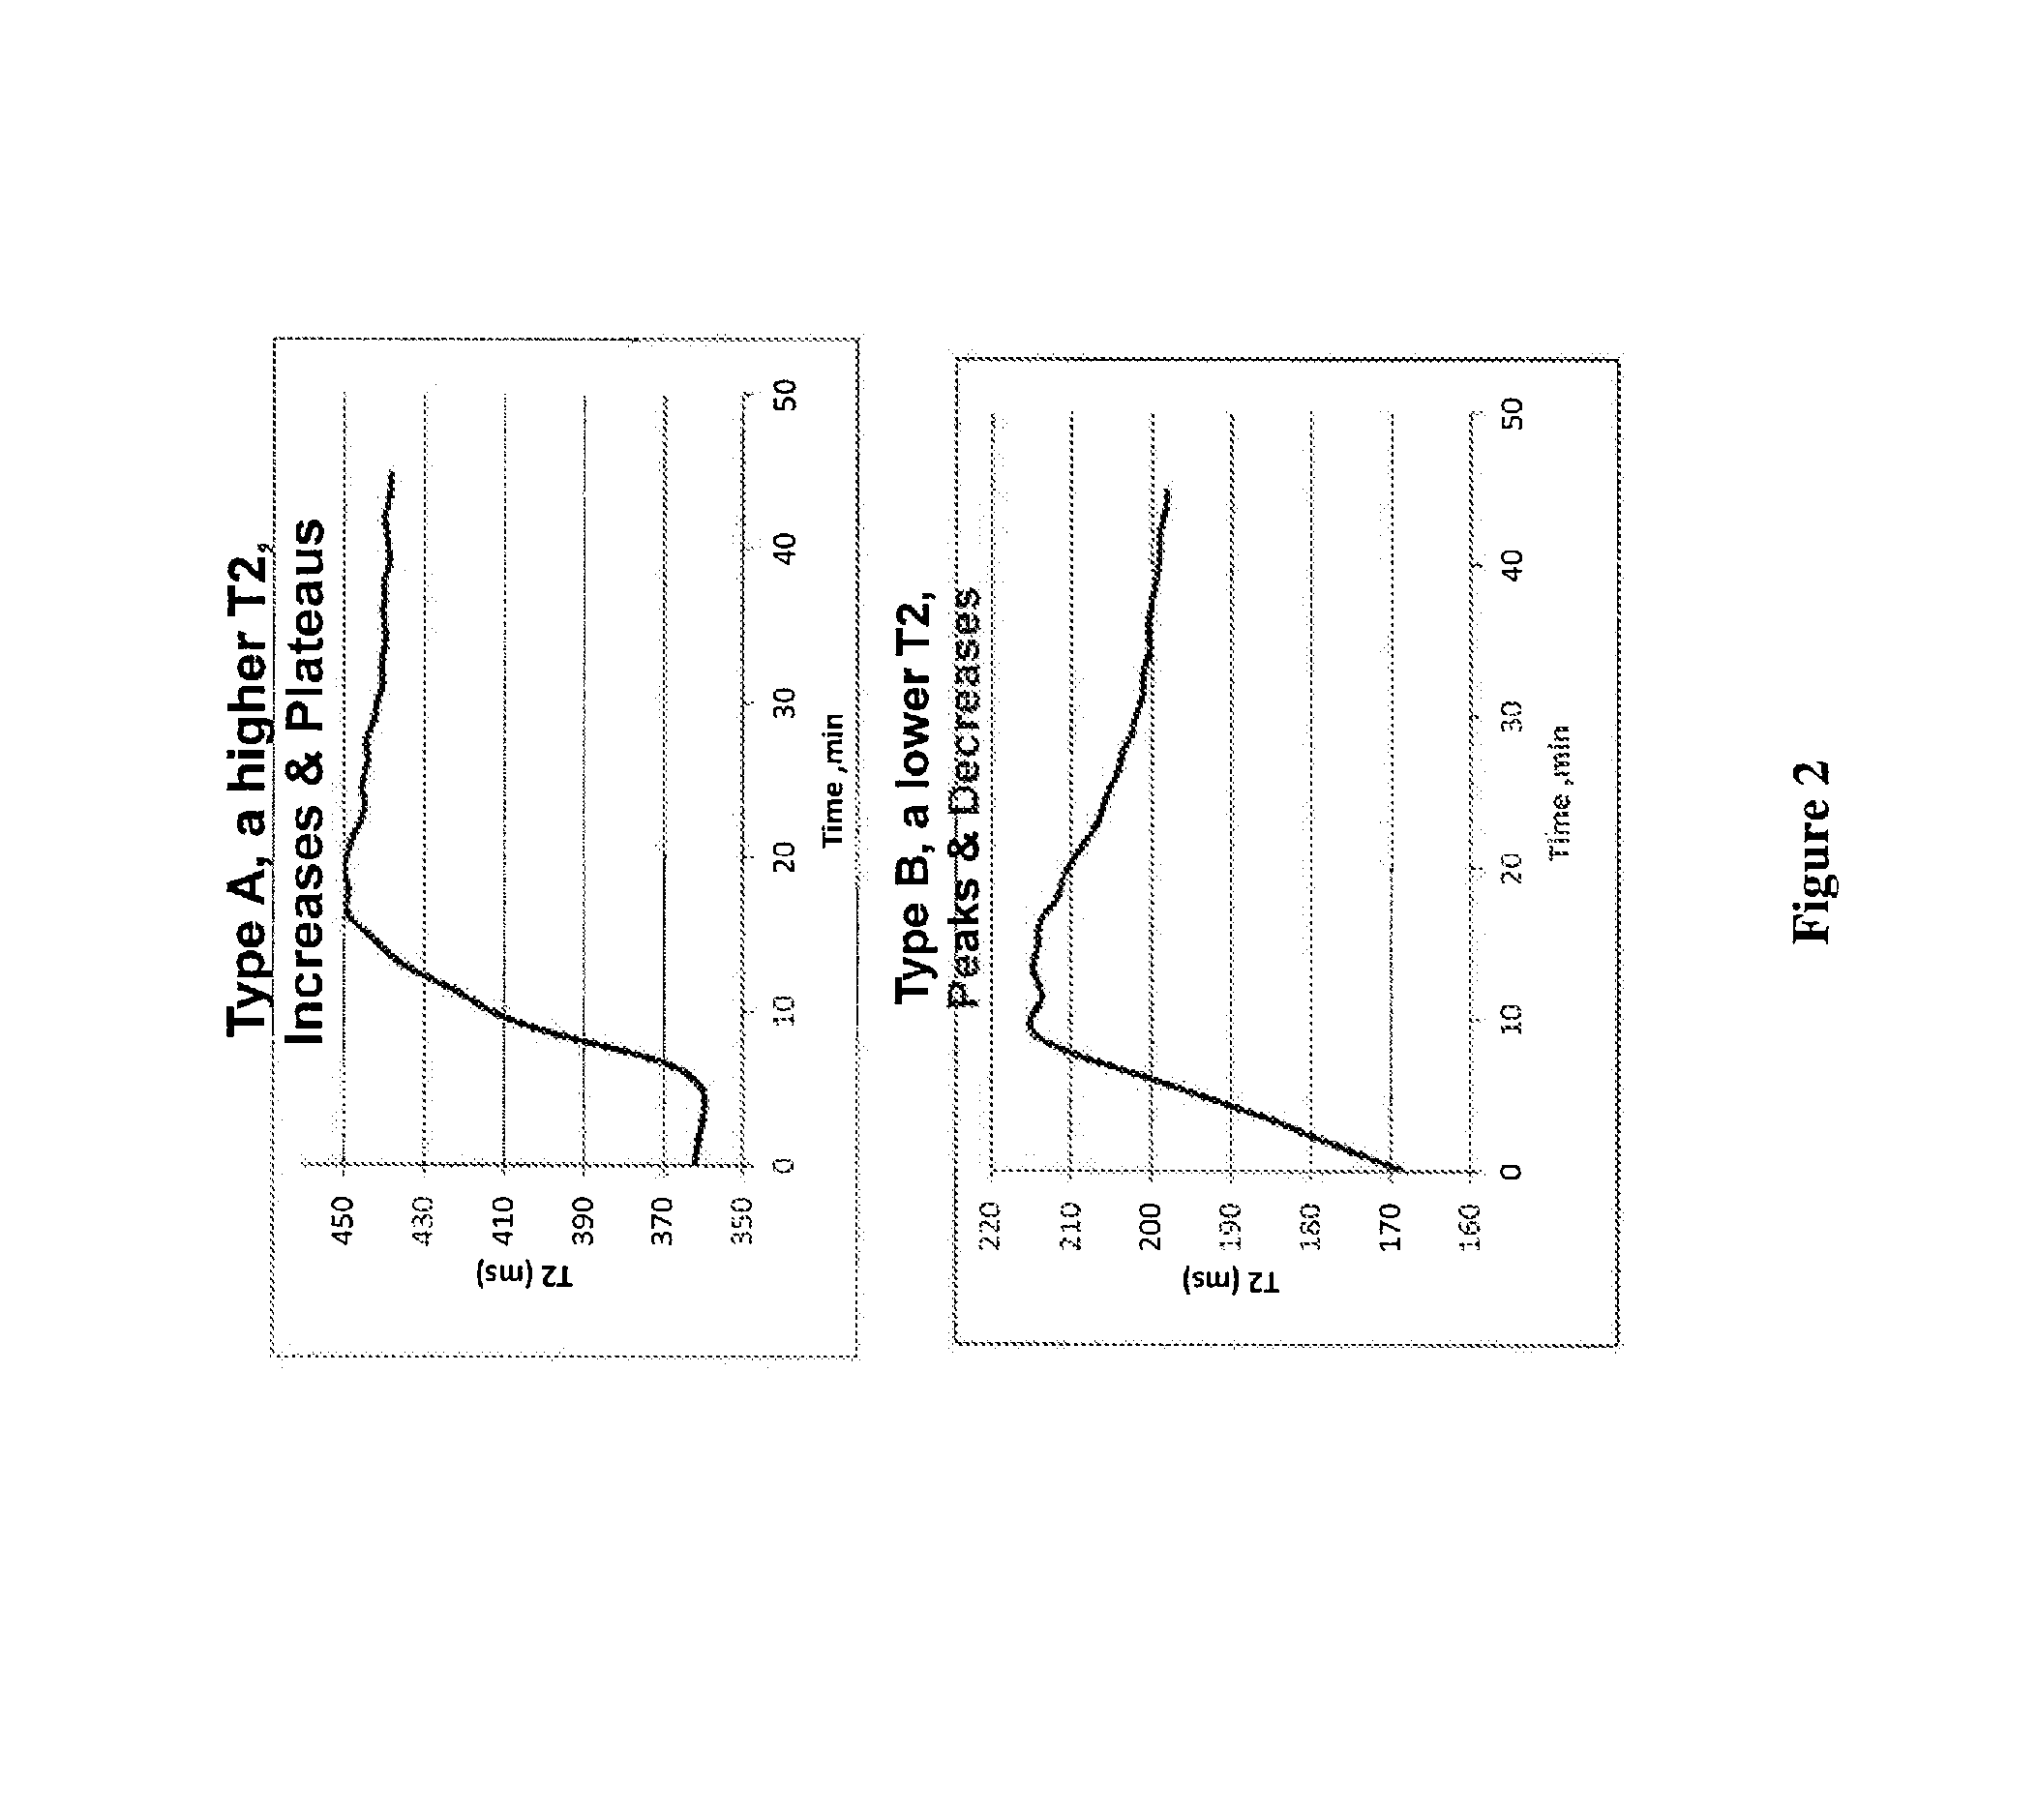 Nmr methods for monitoring blood clot formation